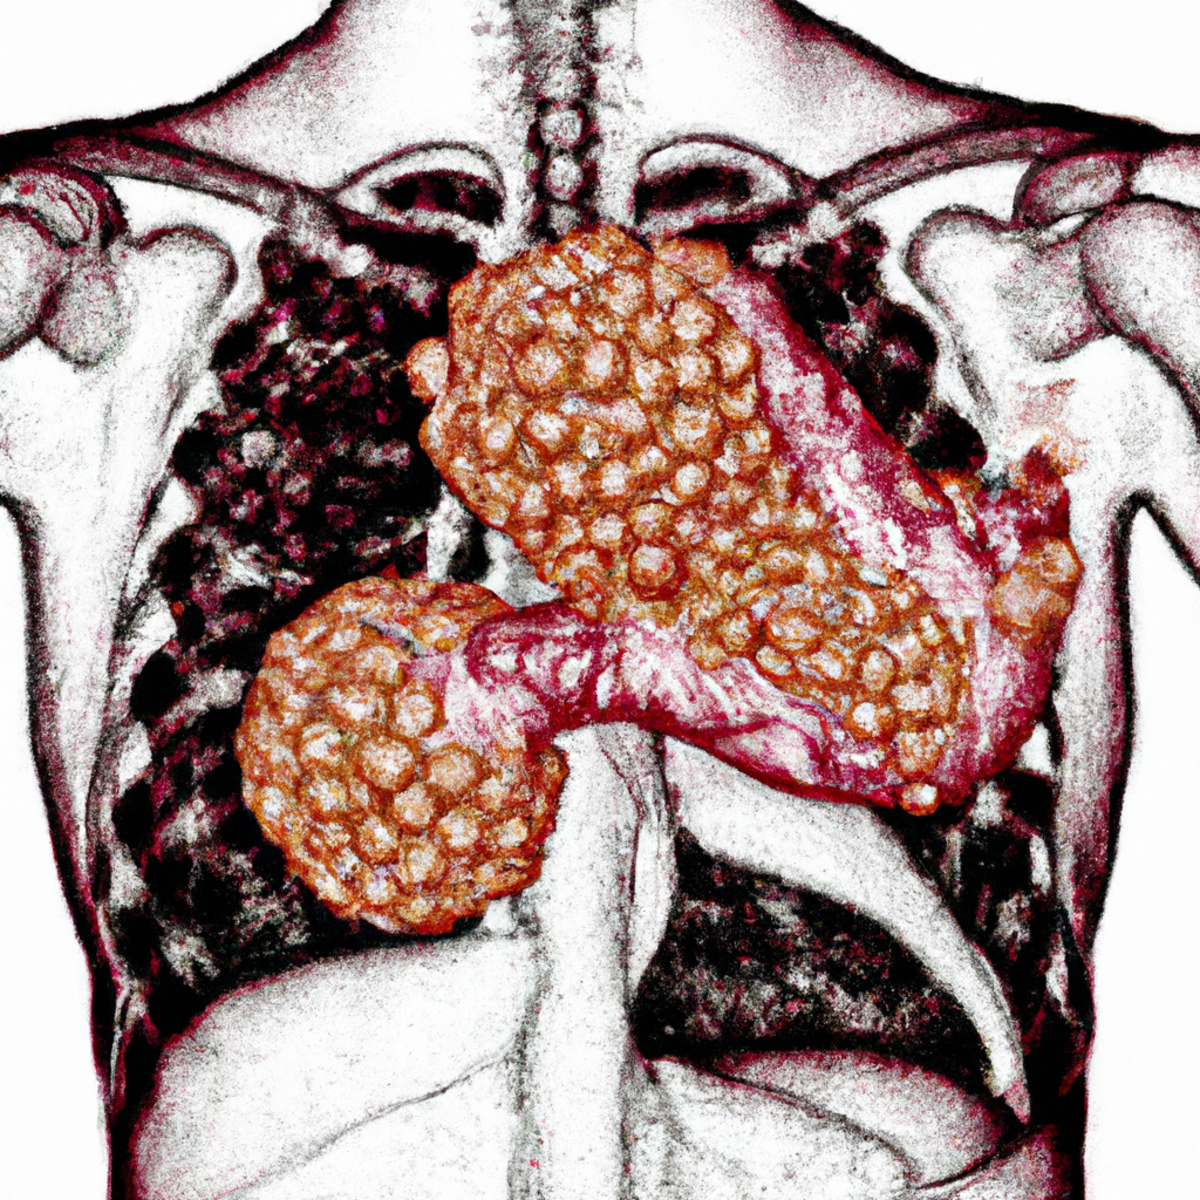 Close-up of human lung with pink and gray alveoli, depicting proteinaceous material accumulation in Pulmonary Alveolar Proteinosis (PAP).